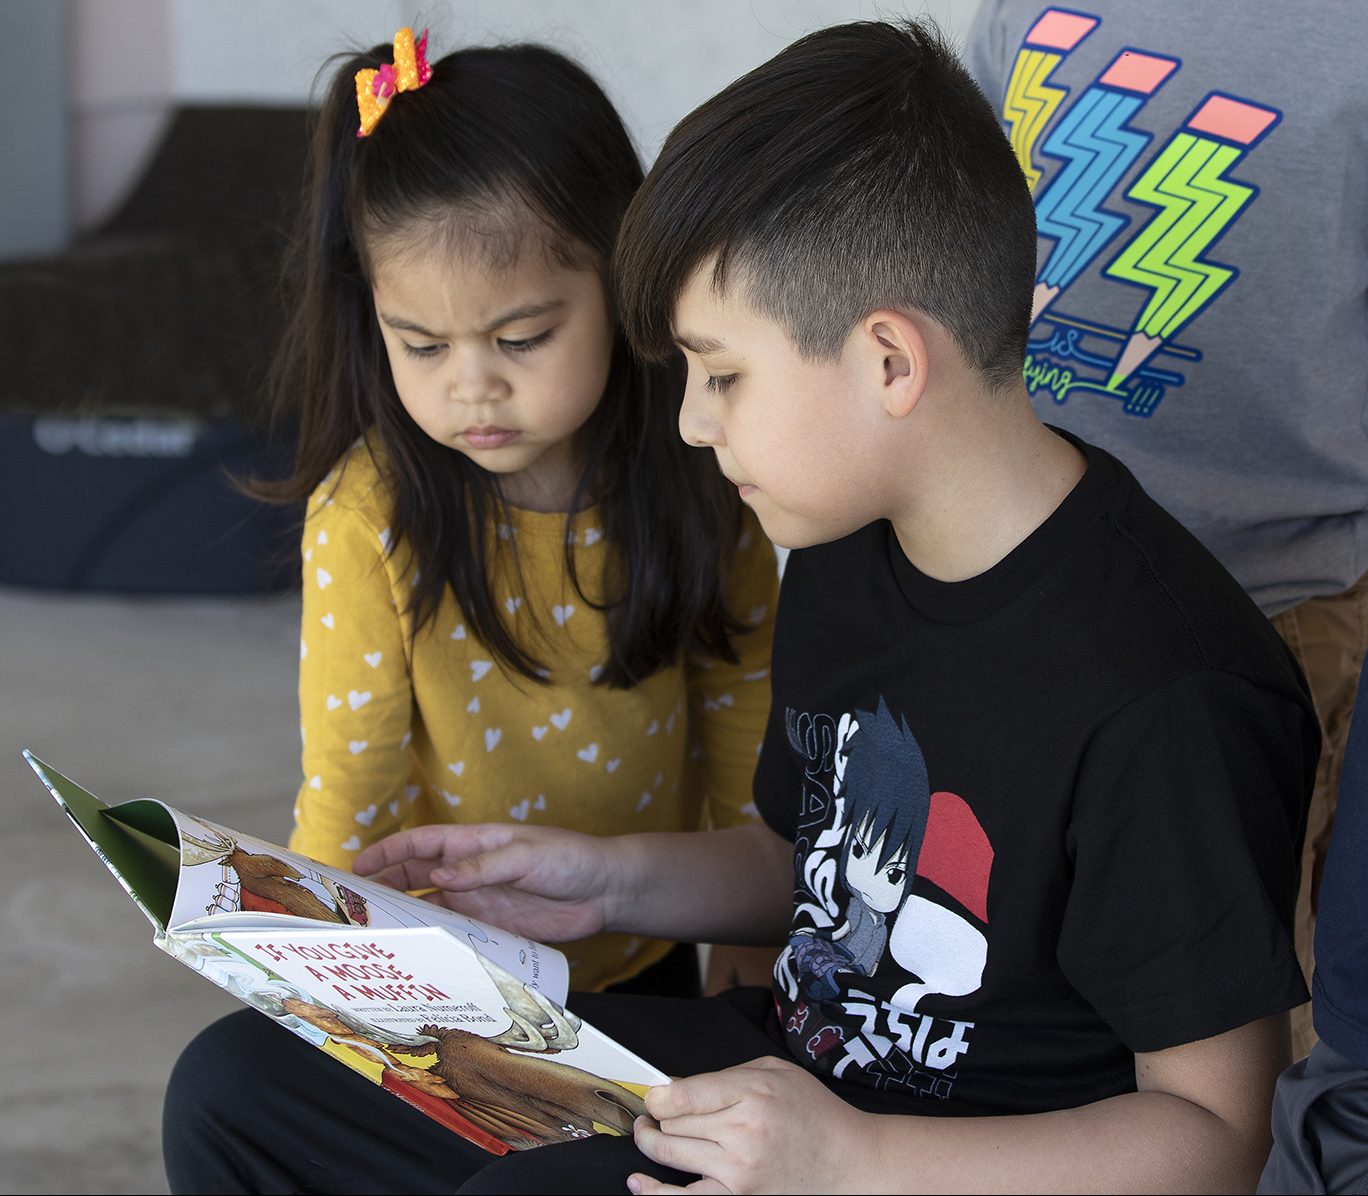 boy and girl sit together looking at a book